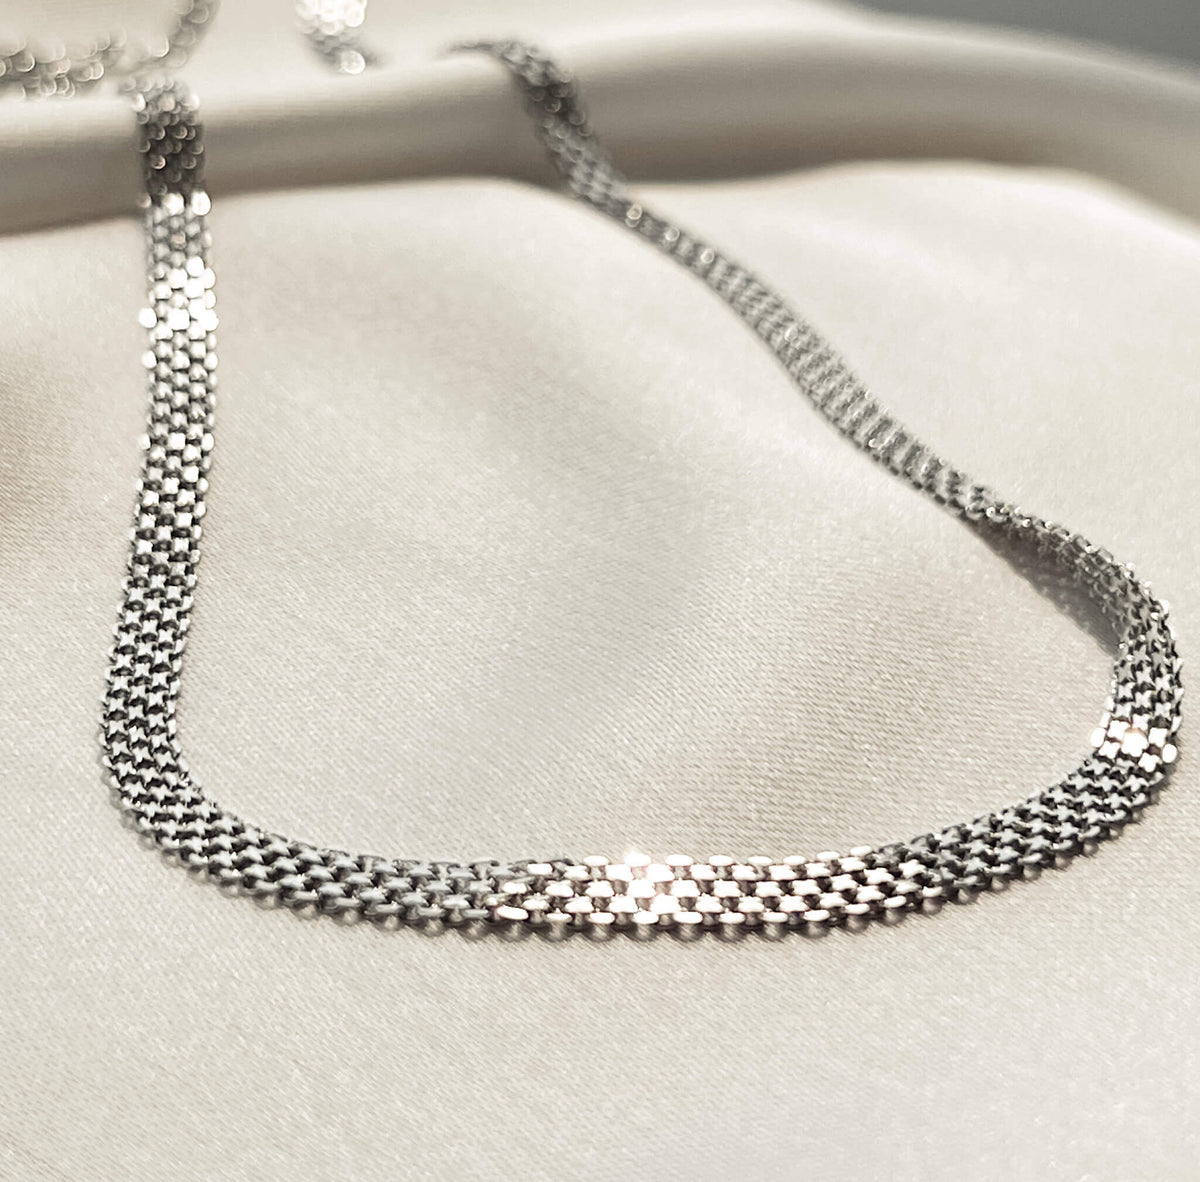 silver debonair chain on soft silk. The chain has a unique texture and design which folds in an elegant way. It has an extension clasp so it can be worn as a choker or extended. 